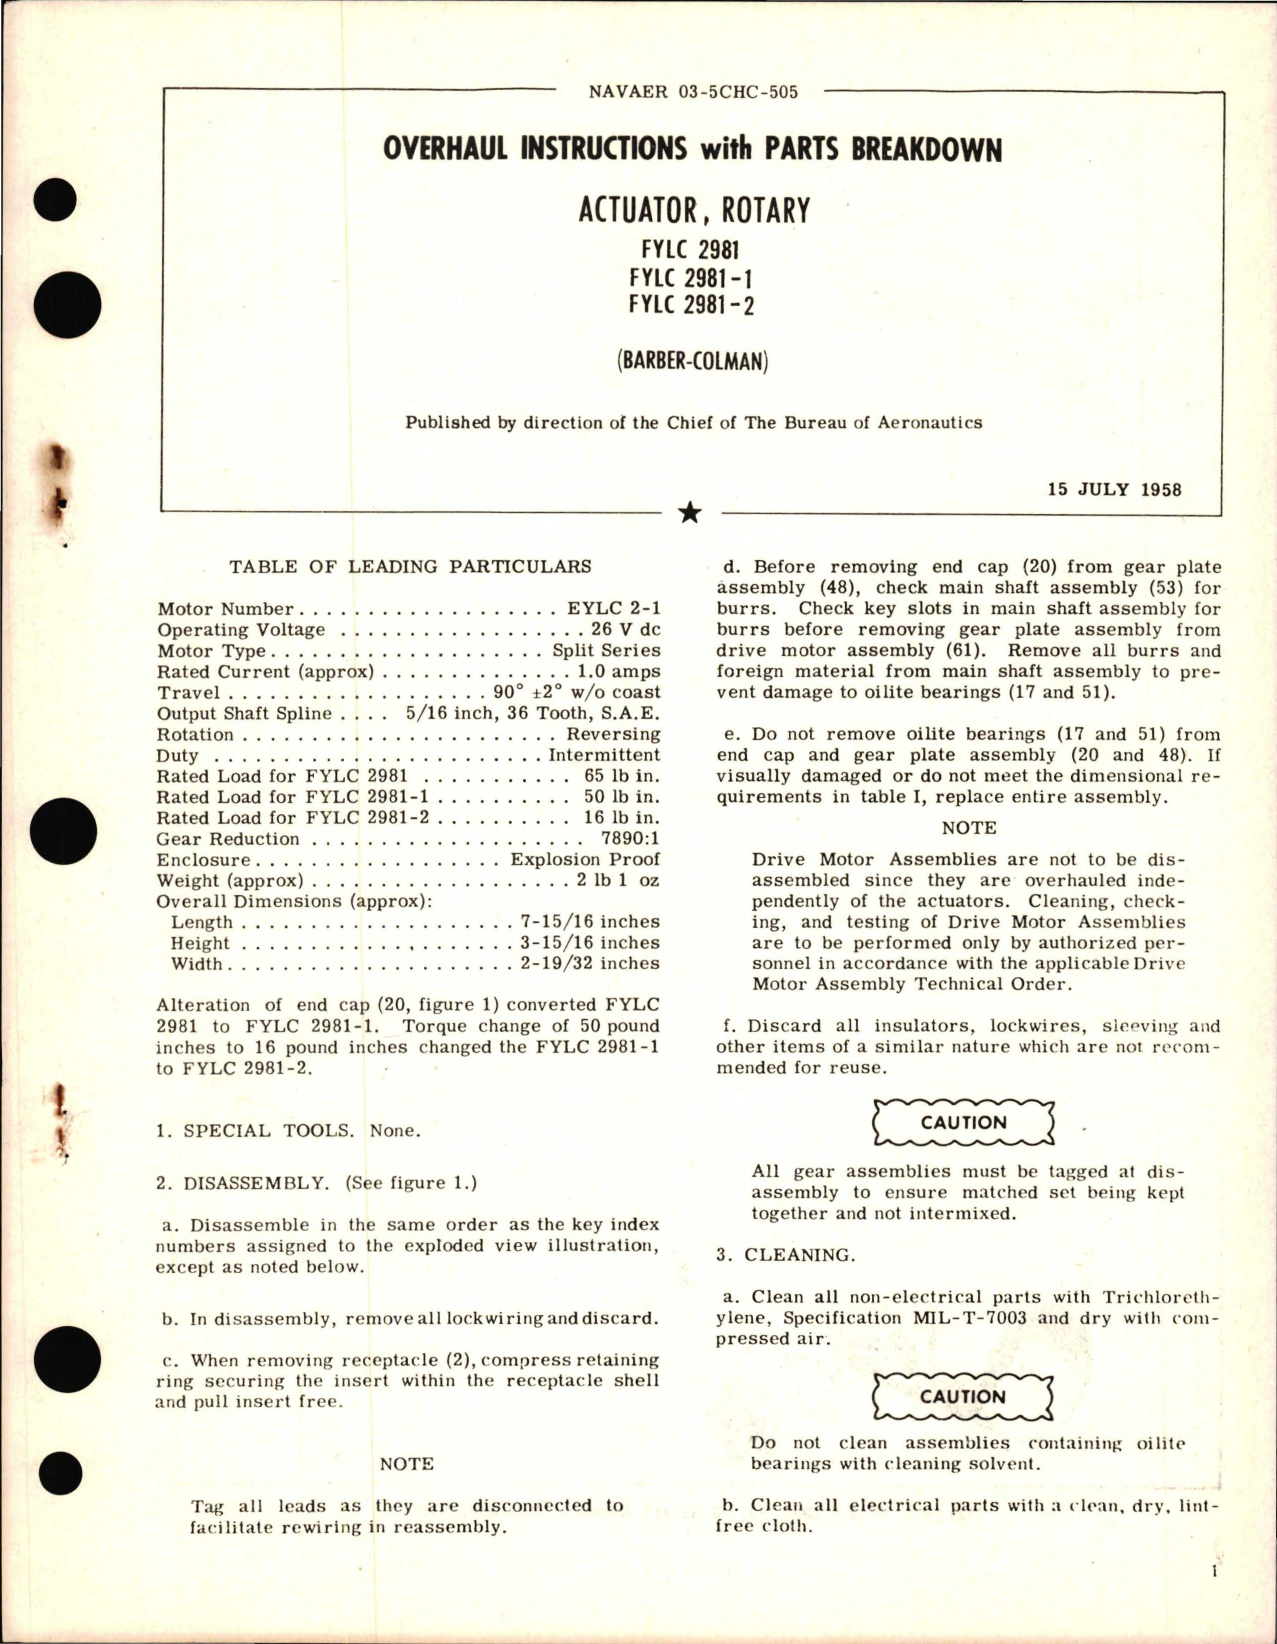 Sample page 1 from AirCorps Library document: Overhaul Instructions with Parts Breakdown for Rotary Actuator - FYLC 2981, FYLC 2981-1 and FYLC-2981-2 